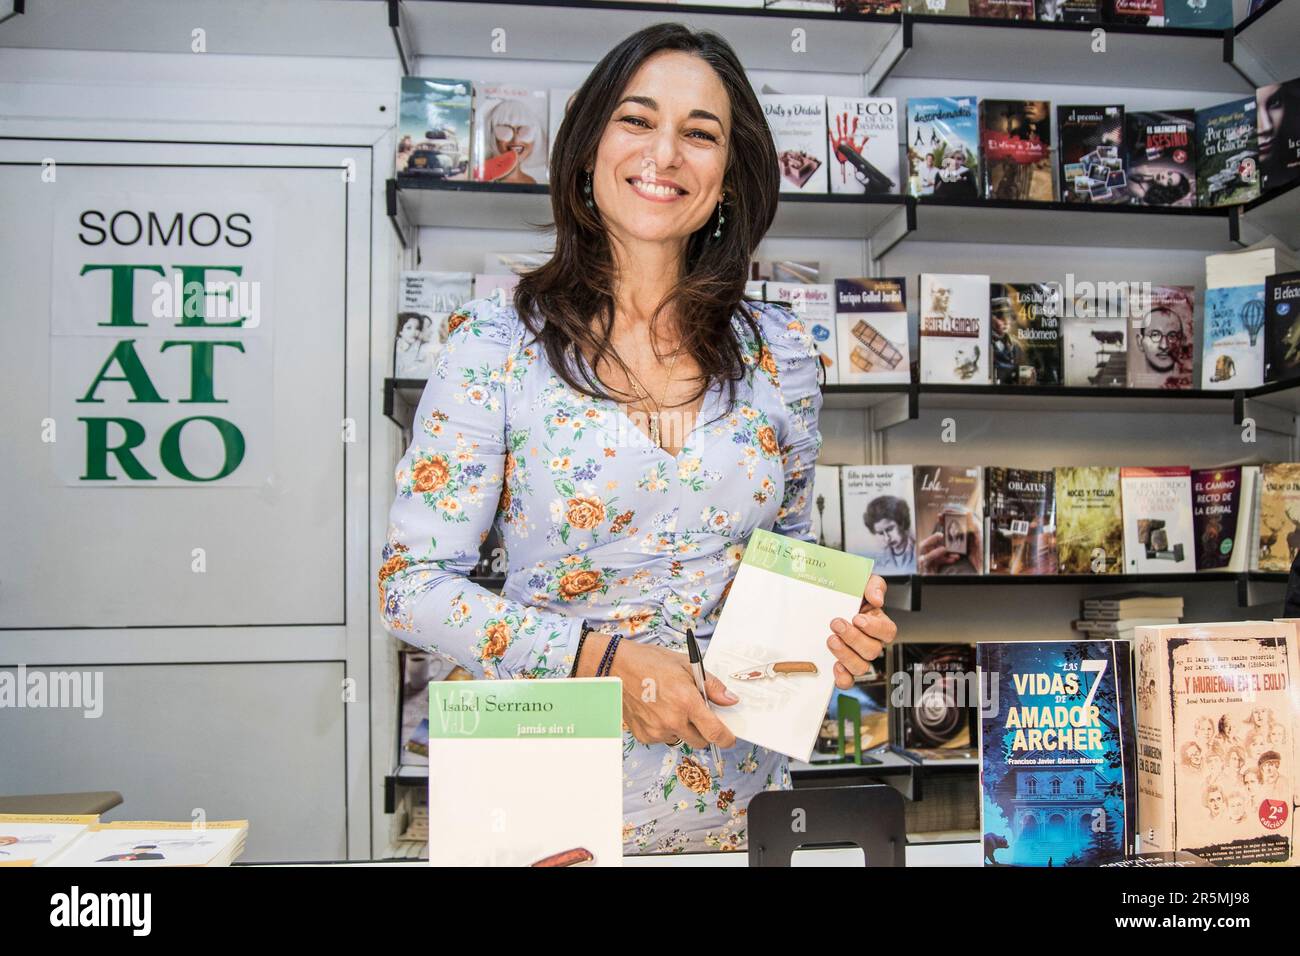 The Actress And Writer Isabel Serrano At The Madrid Book Fair 82 Edition In The Park Of El Retiro Madrid Spain Credit: agefotostock /Alamy Live News Stock Photo